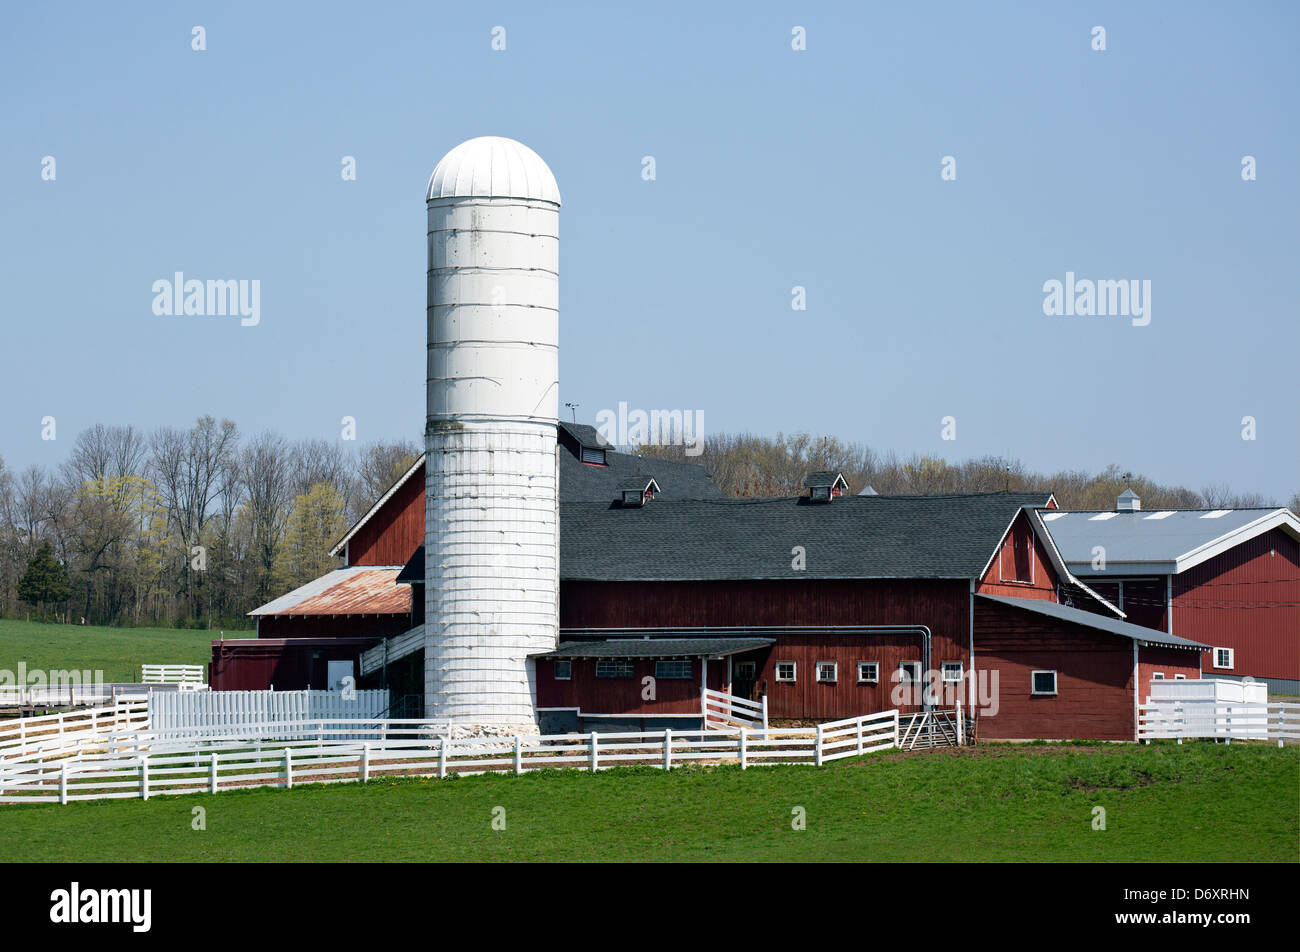 Dairy farm red barn, white silo and corral. Stock Photo